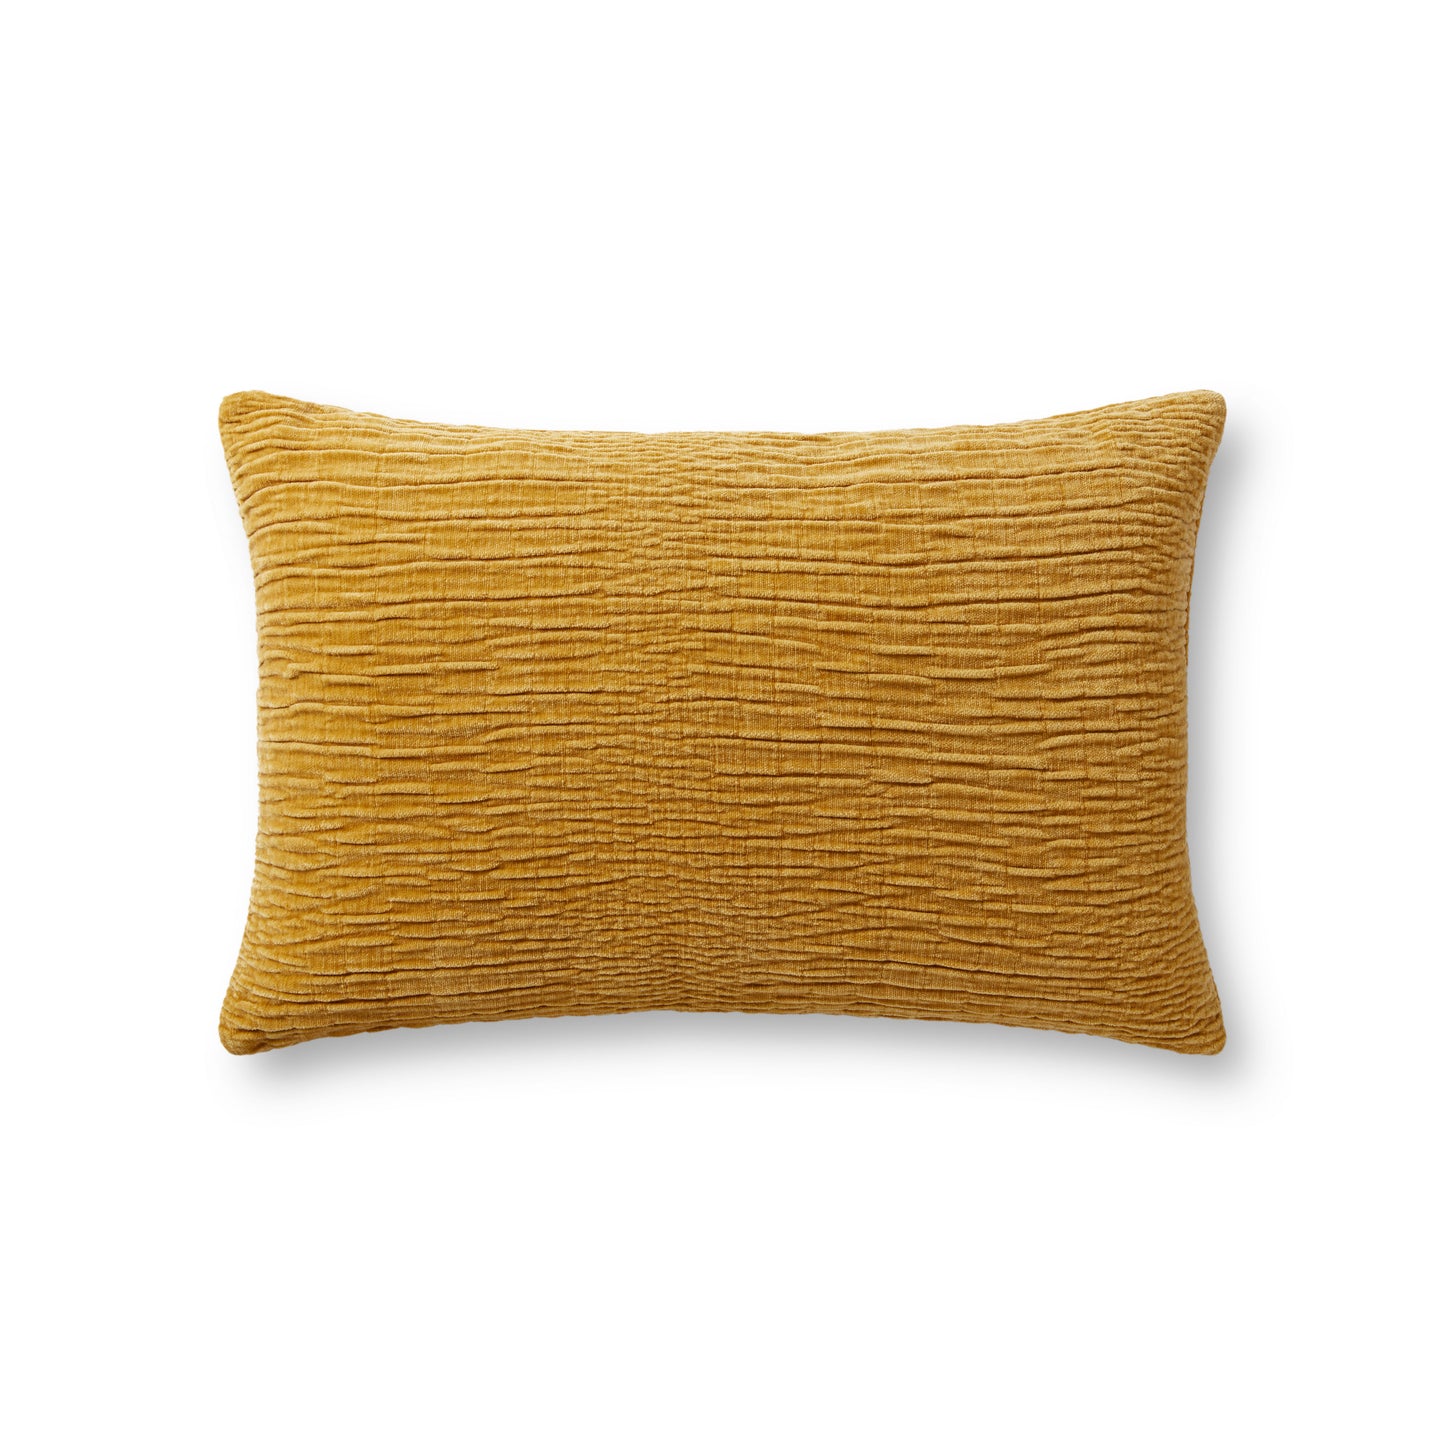 Photo of a pillow;  Gold 13'' x 21'' Cover w/Poly Pillow